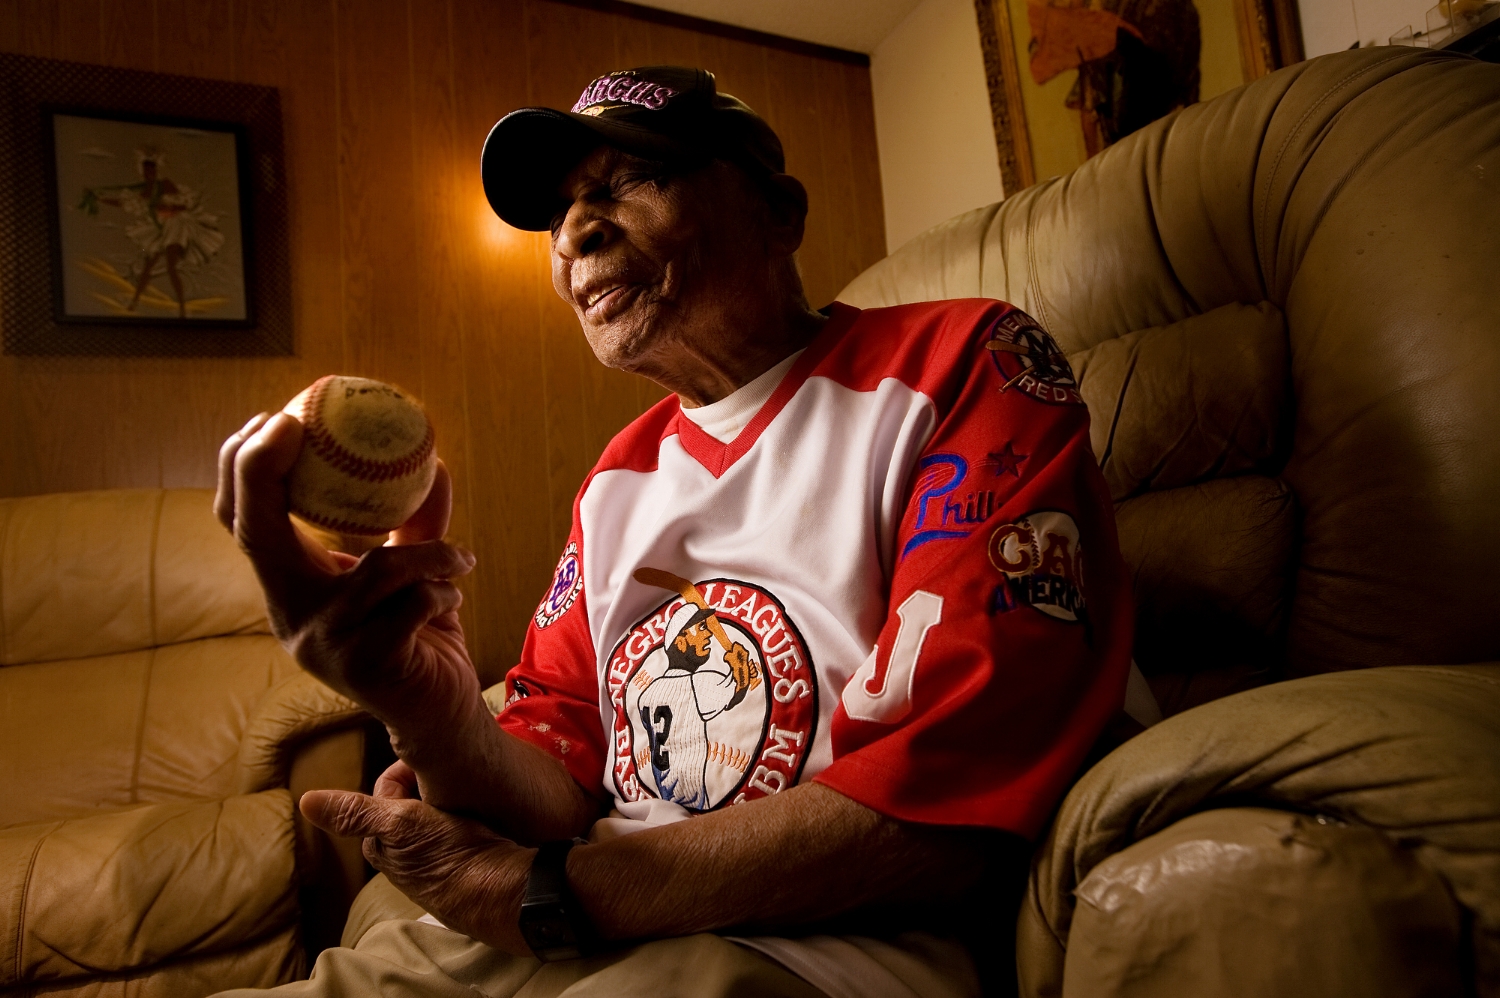  Former Negro Leagues baseball player Elmer Carter 98, at his home in Rancho Cordova on Wednesday, March 11, 2009. Carter is believed to be one of the few remaining Negro Leagues players still living, and played for the Kansas City Monarchs from 1929